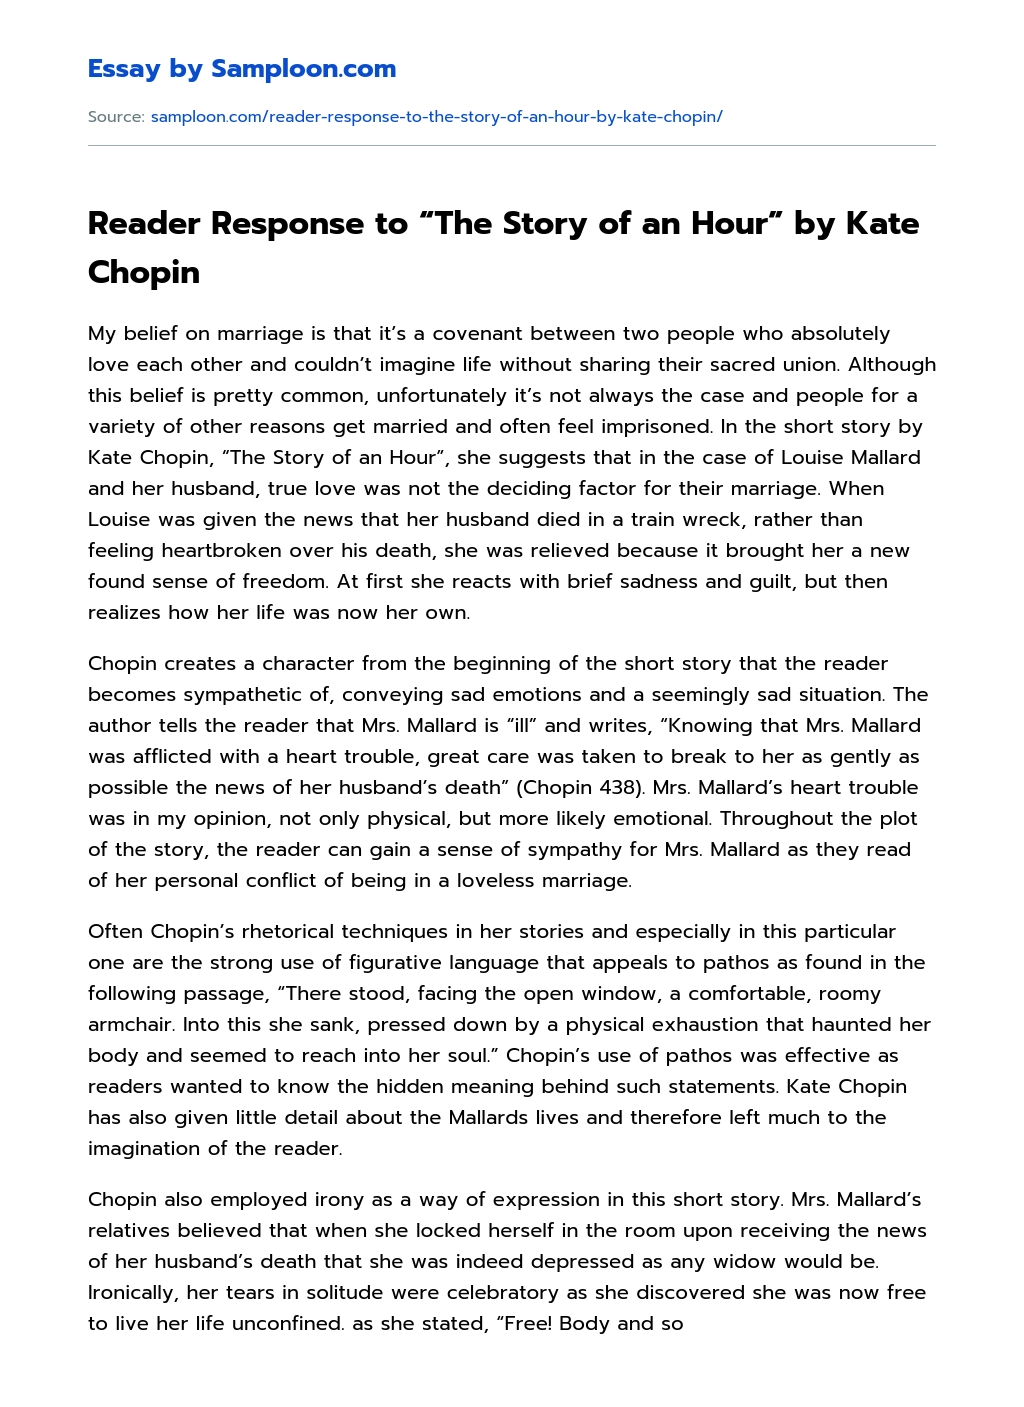 Reader Response to “The Story of an Hour” by Kate Chopin Rhetorical Analysis essay